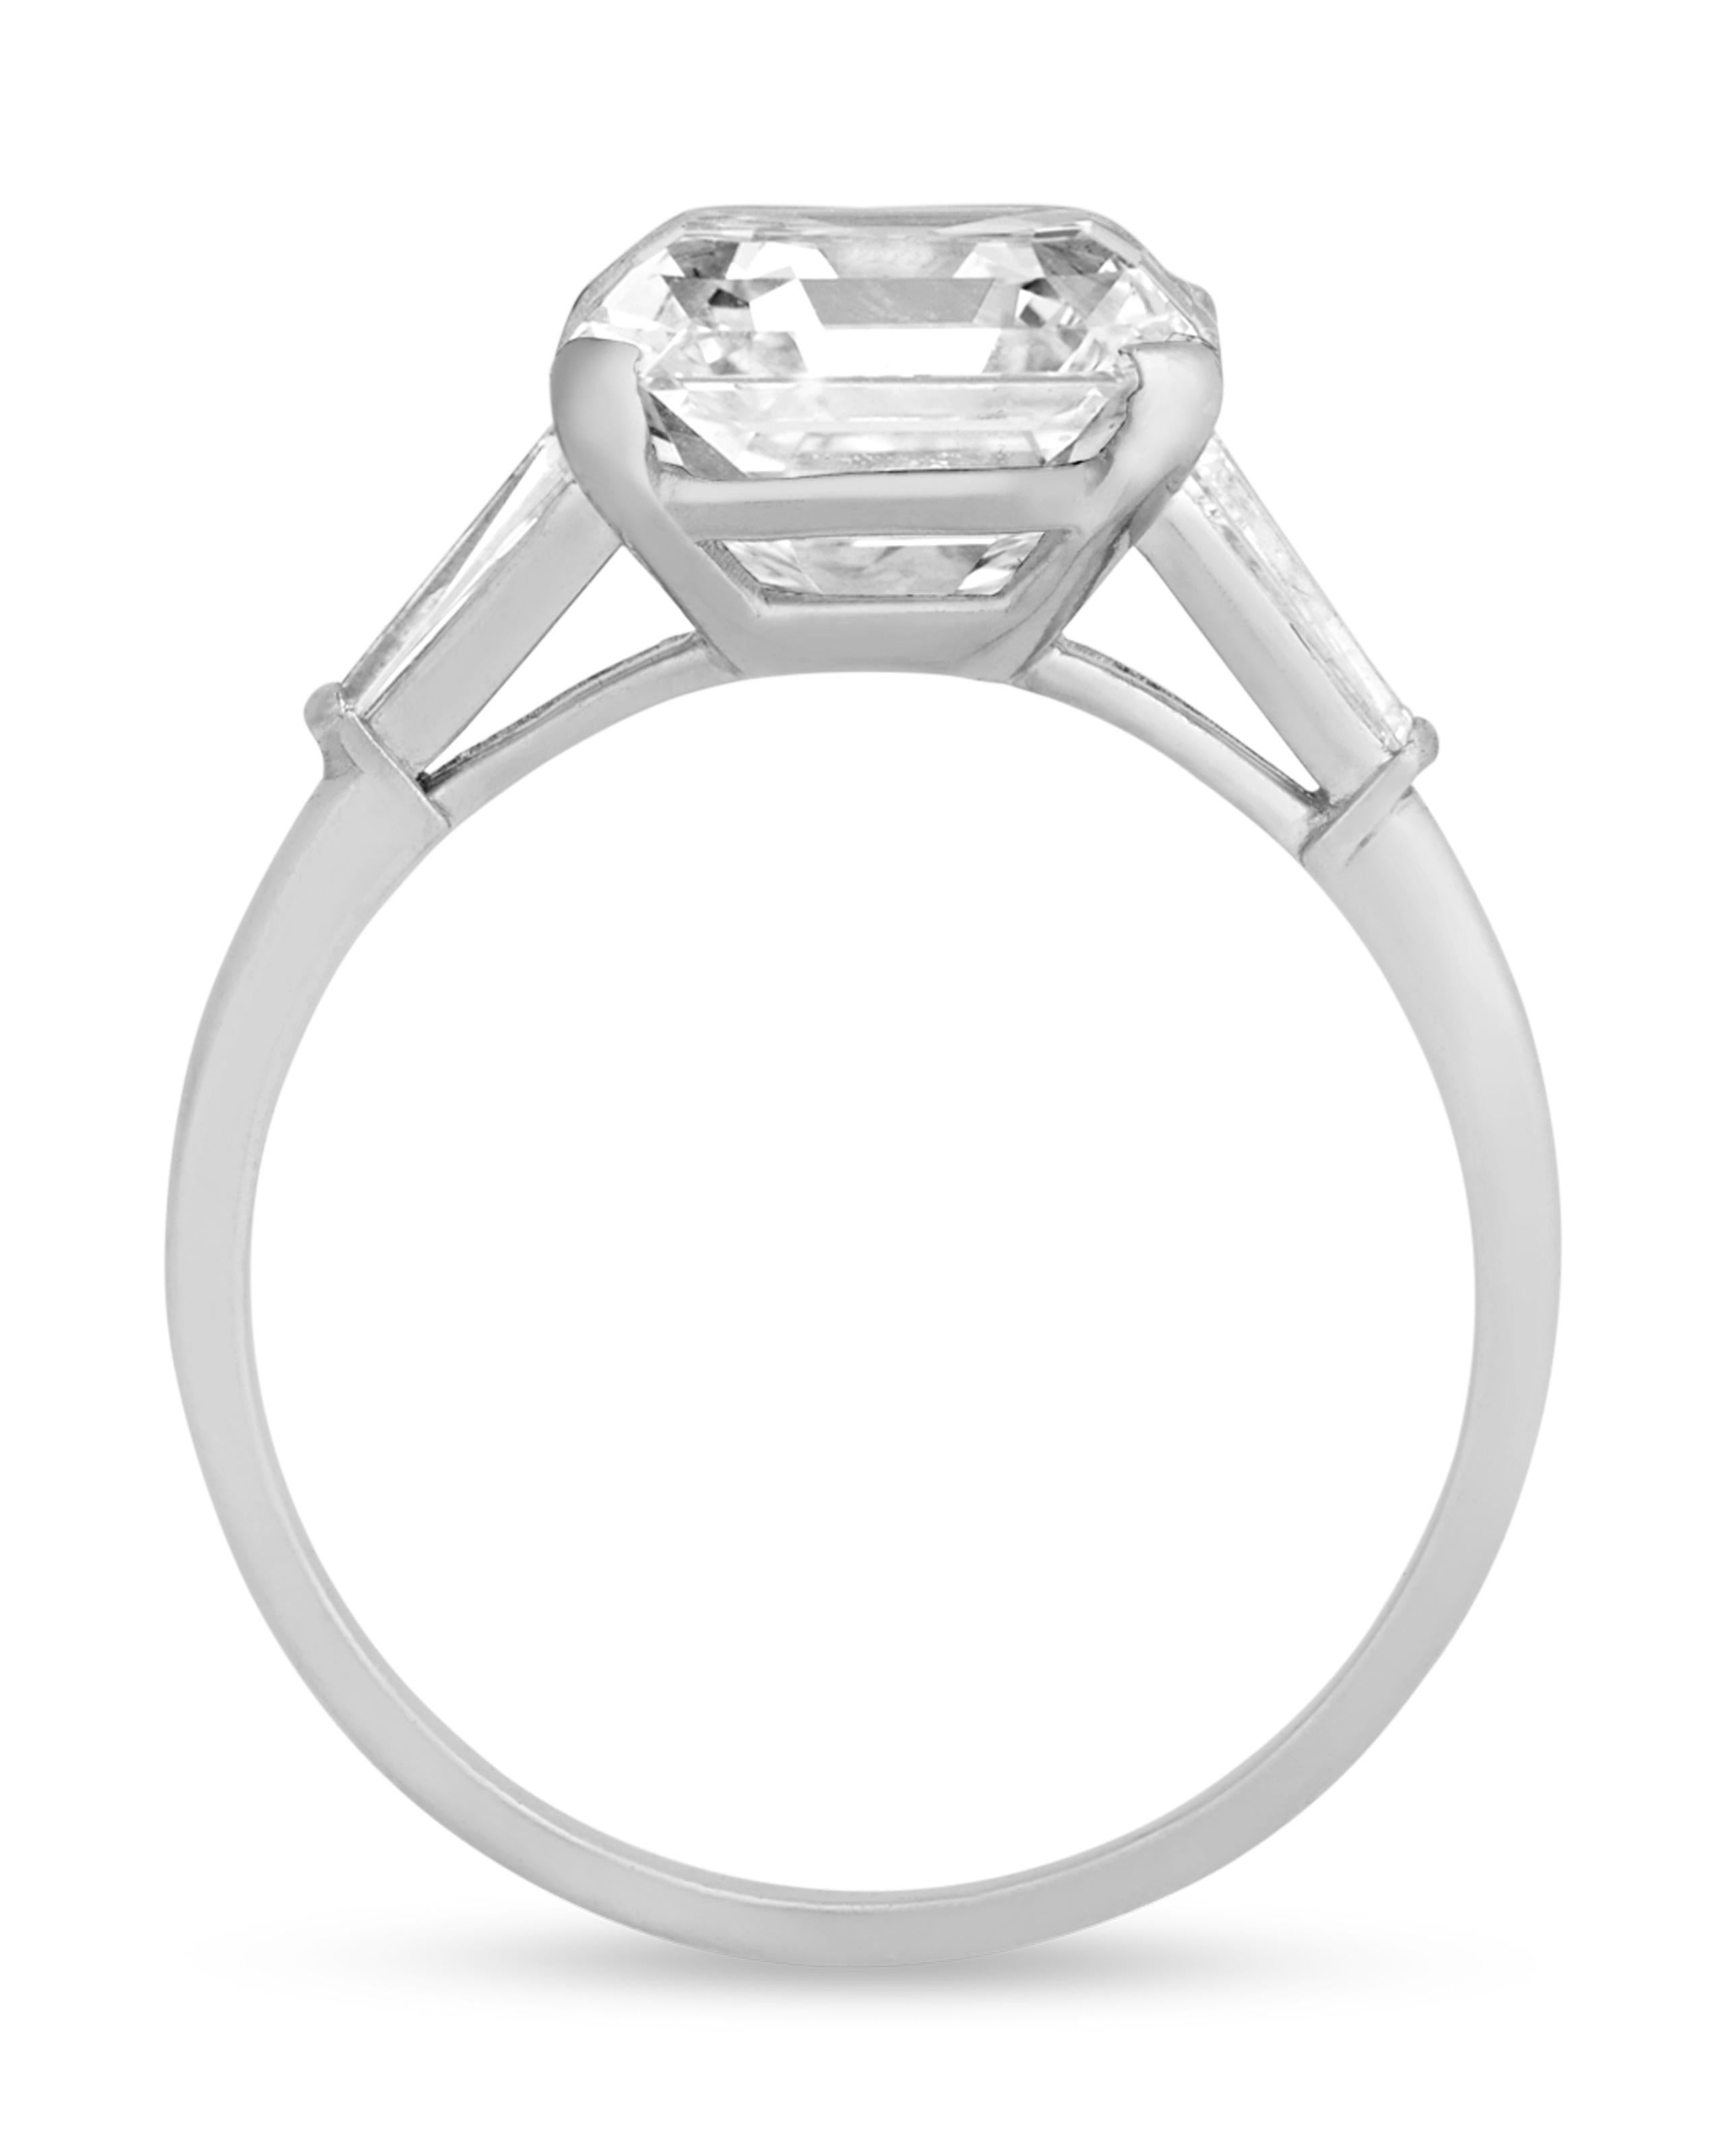 Remarkably reflective and brilliant, the Asscher-cut diamond at the center of this ring from famed American jeweler Raymond Yard weighs an impressive 6.20 carats. The patented 74-facet step cut arrangement results in a distinctive, sparkling effect